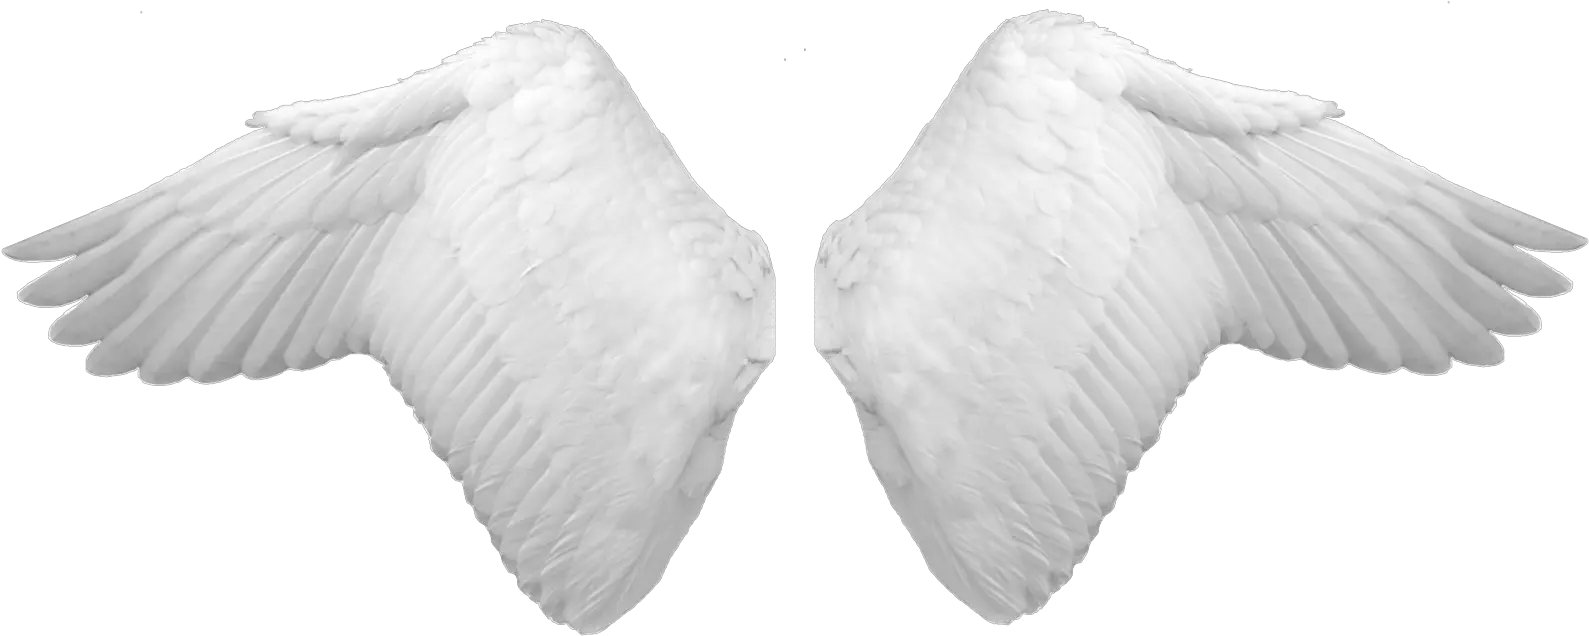 Download White Wings Png Image For Free Angel Wings Psd Wing Png